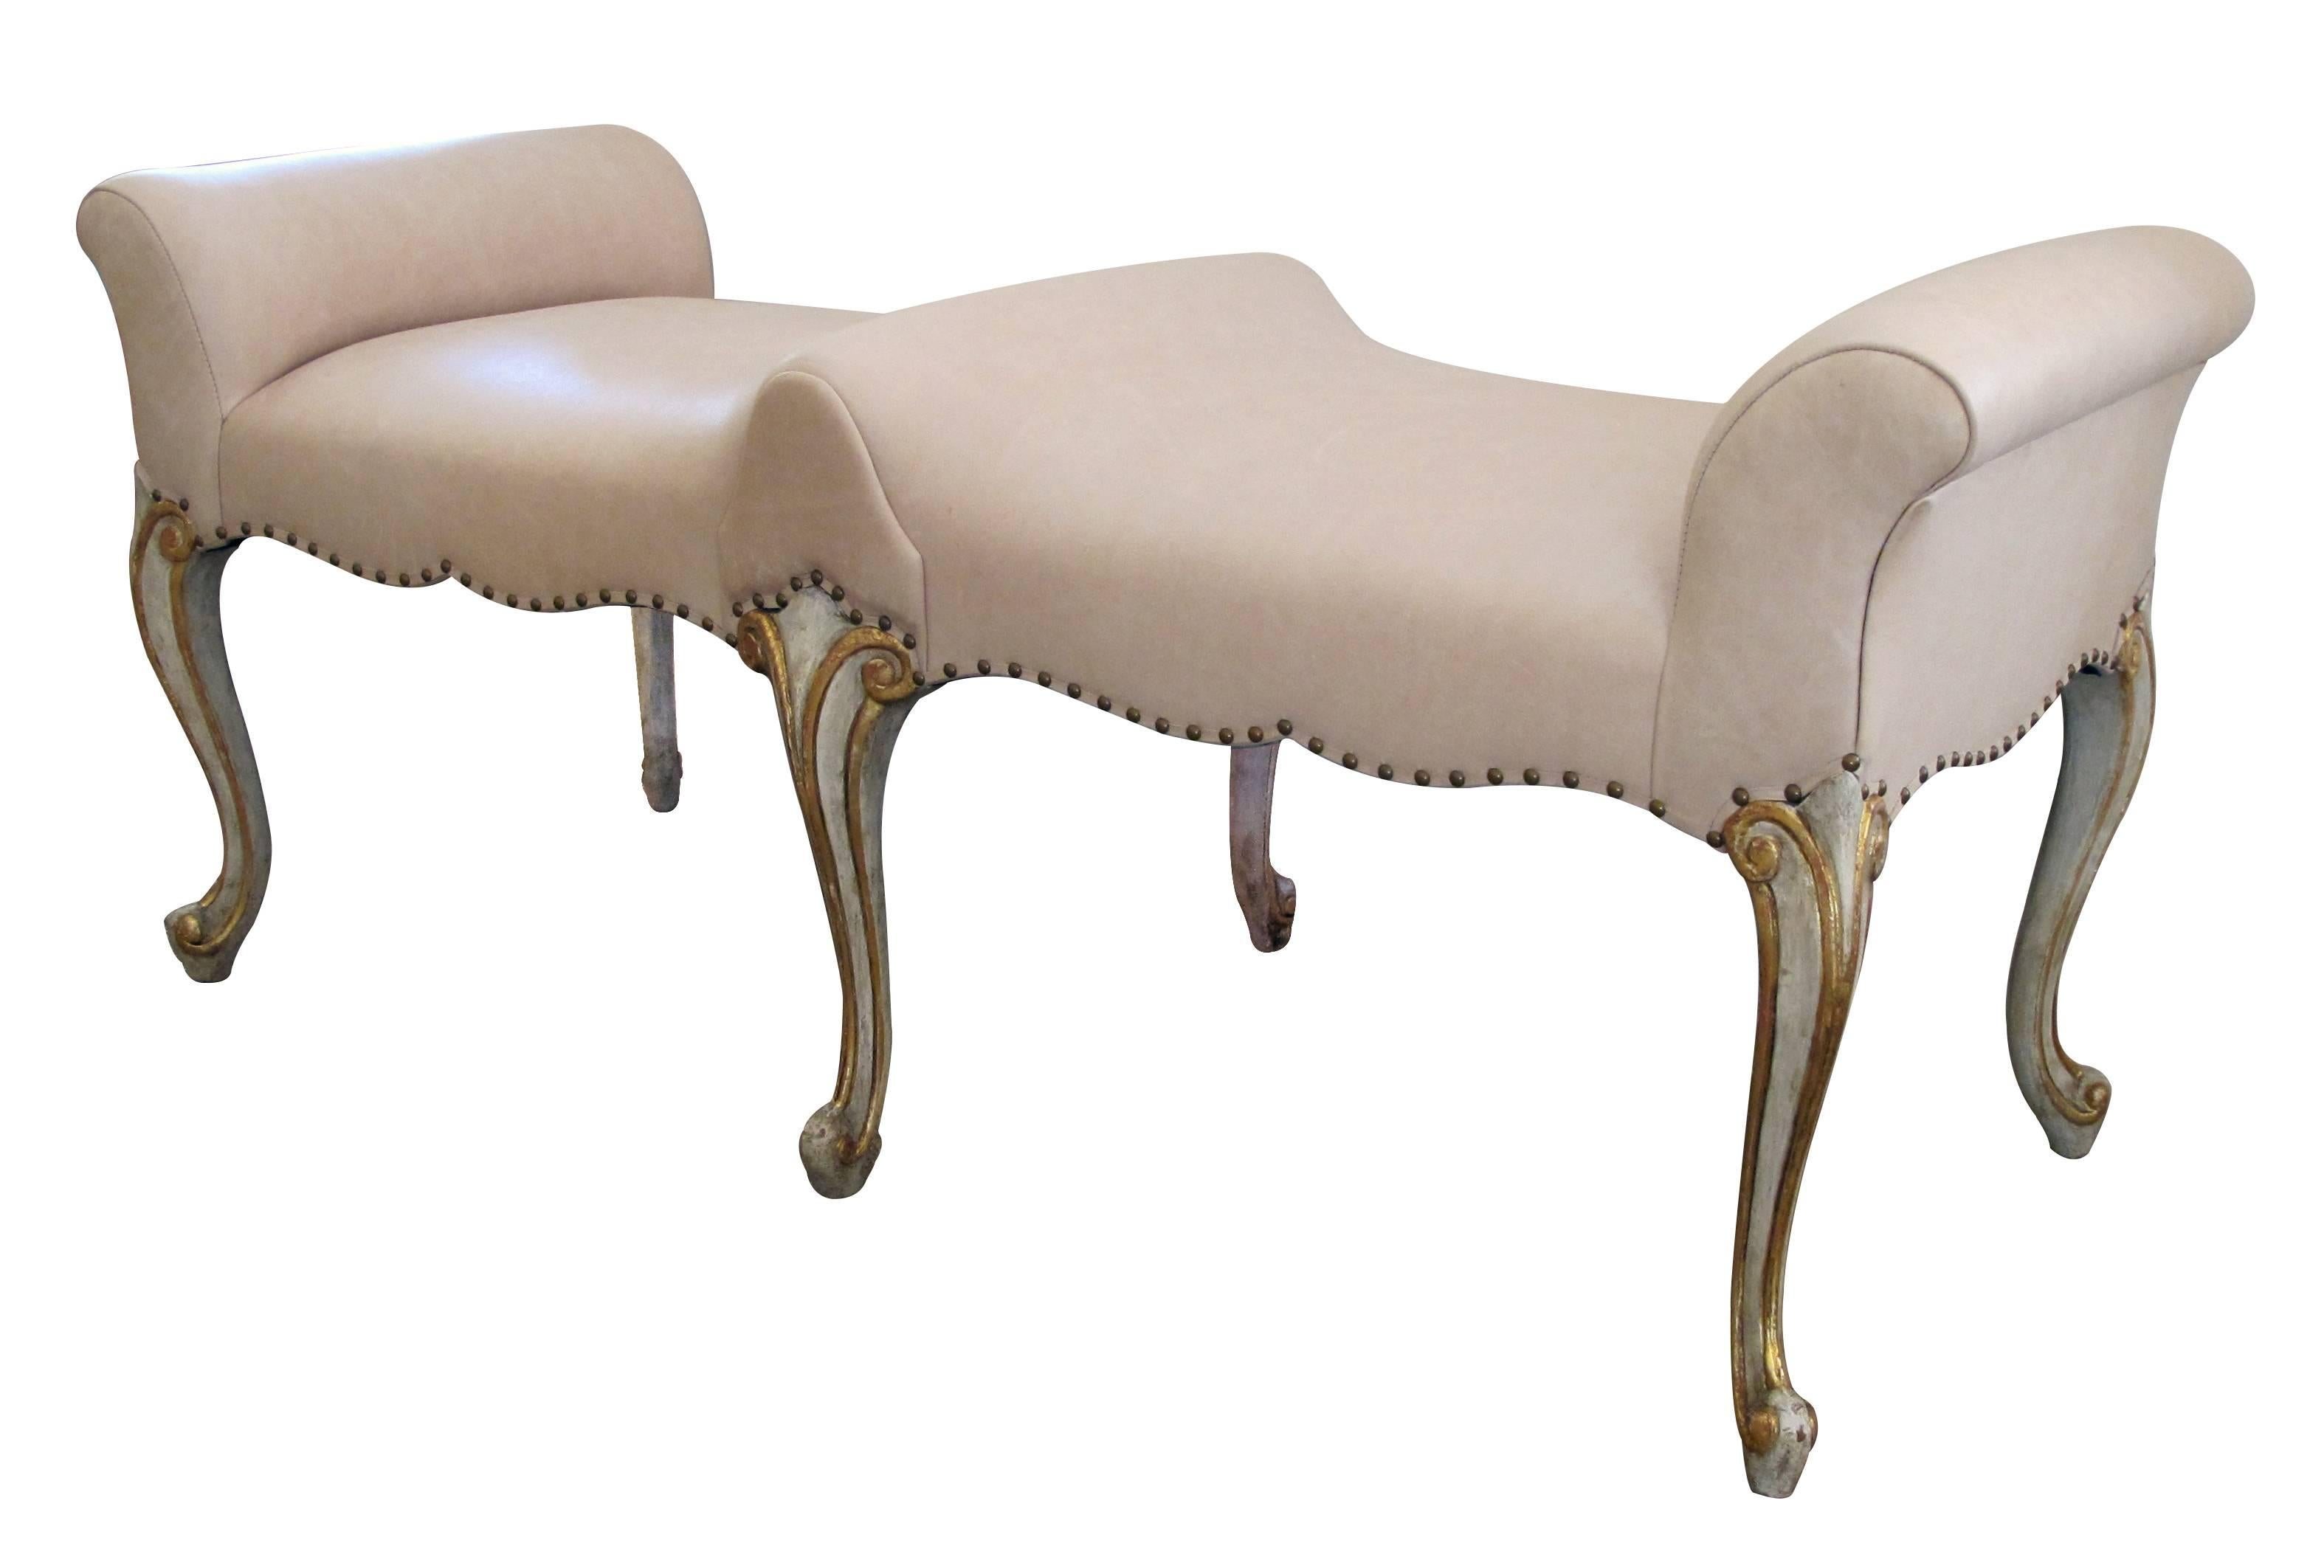 A shapely French Louis XV style pale green painted and parcel-gilt double-seated bench; the long double-seated bench with scrolled arms above a scalloped apron; raised on elegant cabriole supports; new tan leather upholstery.